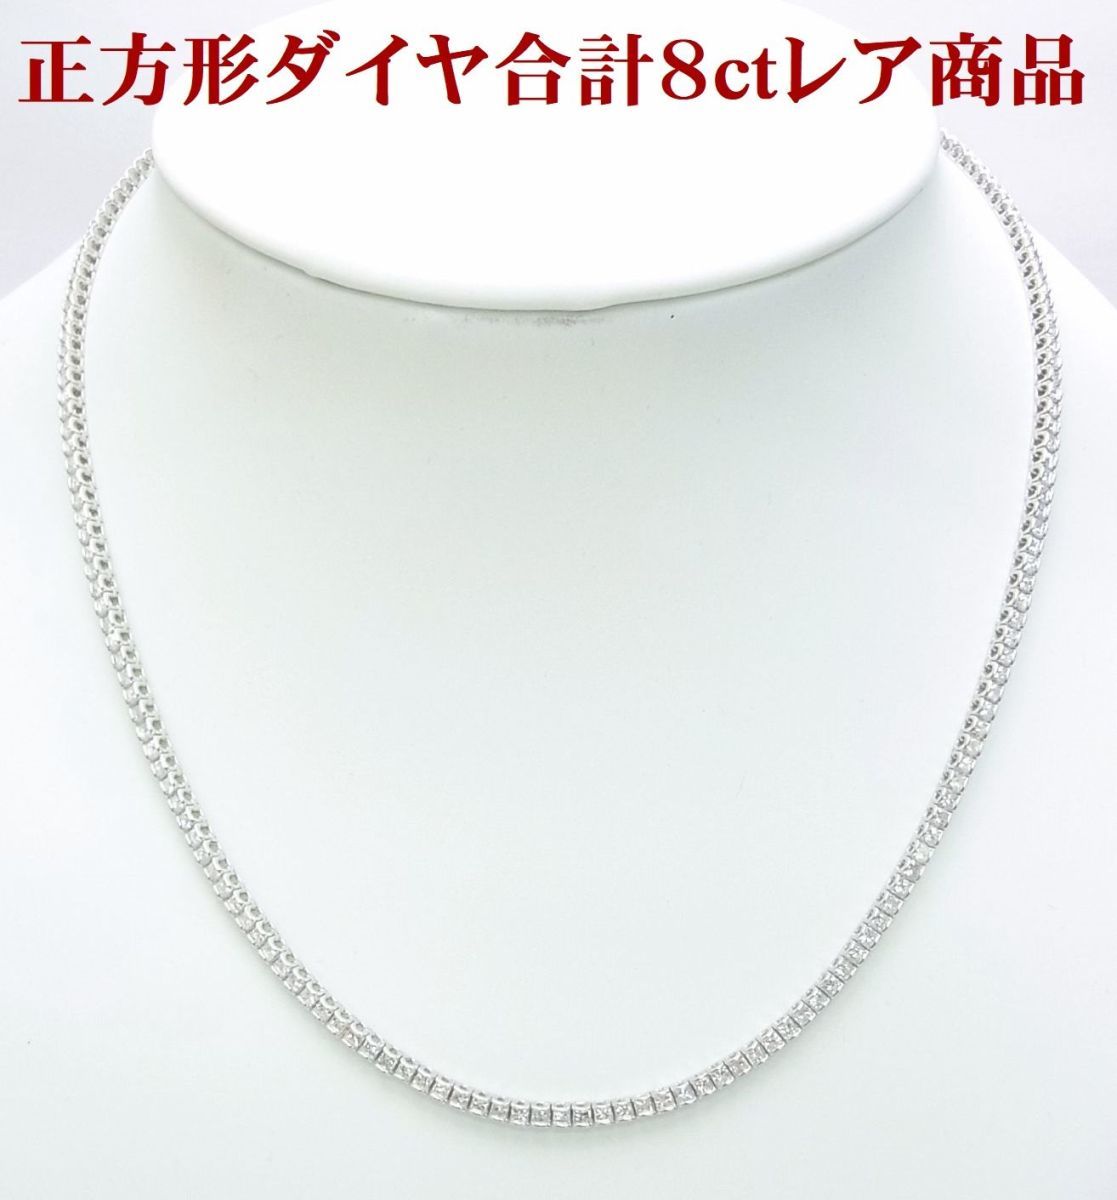  square angle diamond . total 8ct go in .. rare . excellent article natural diamond full necklace 18 gold white made animation equipped free shipping 